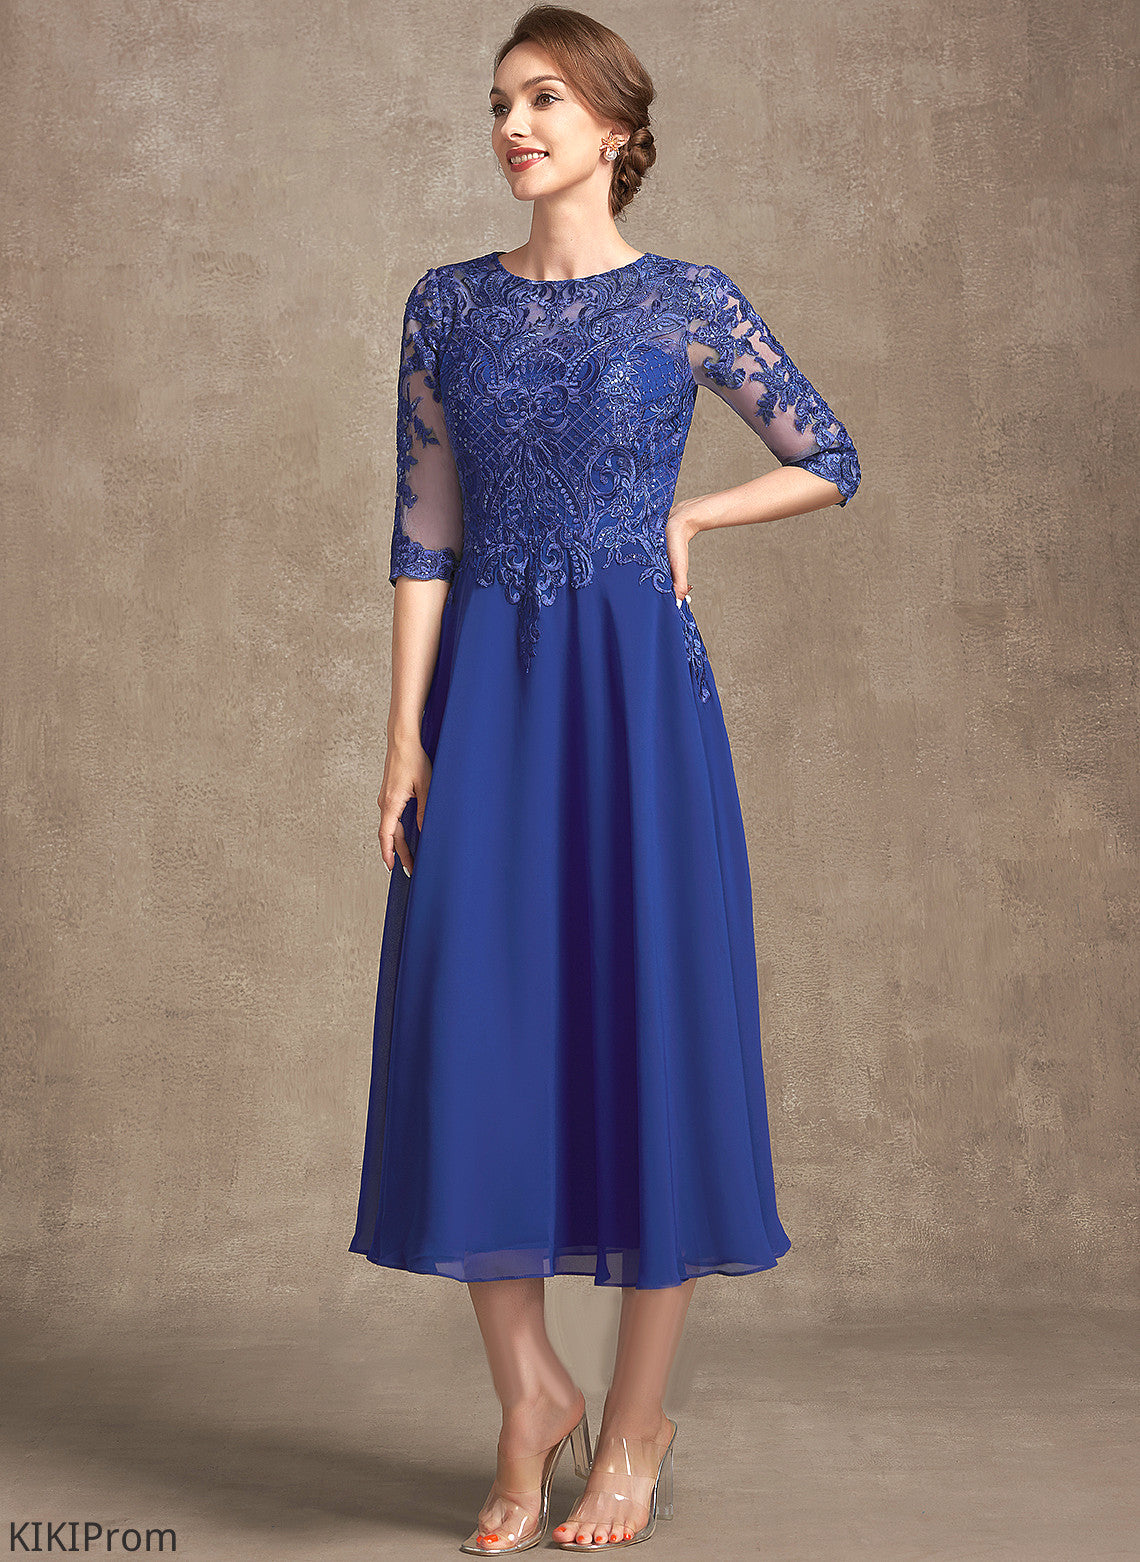 of Mother of the Bride Dresses Dress Mother Tea-Length the Neck Lace With Leyla A-Line Chiffon Bride Sequins Scoop